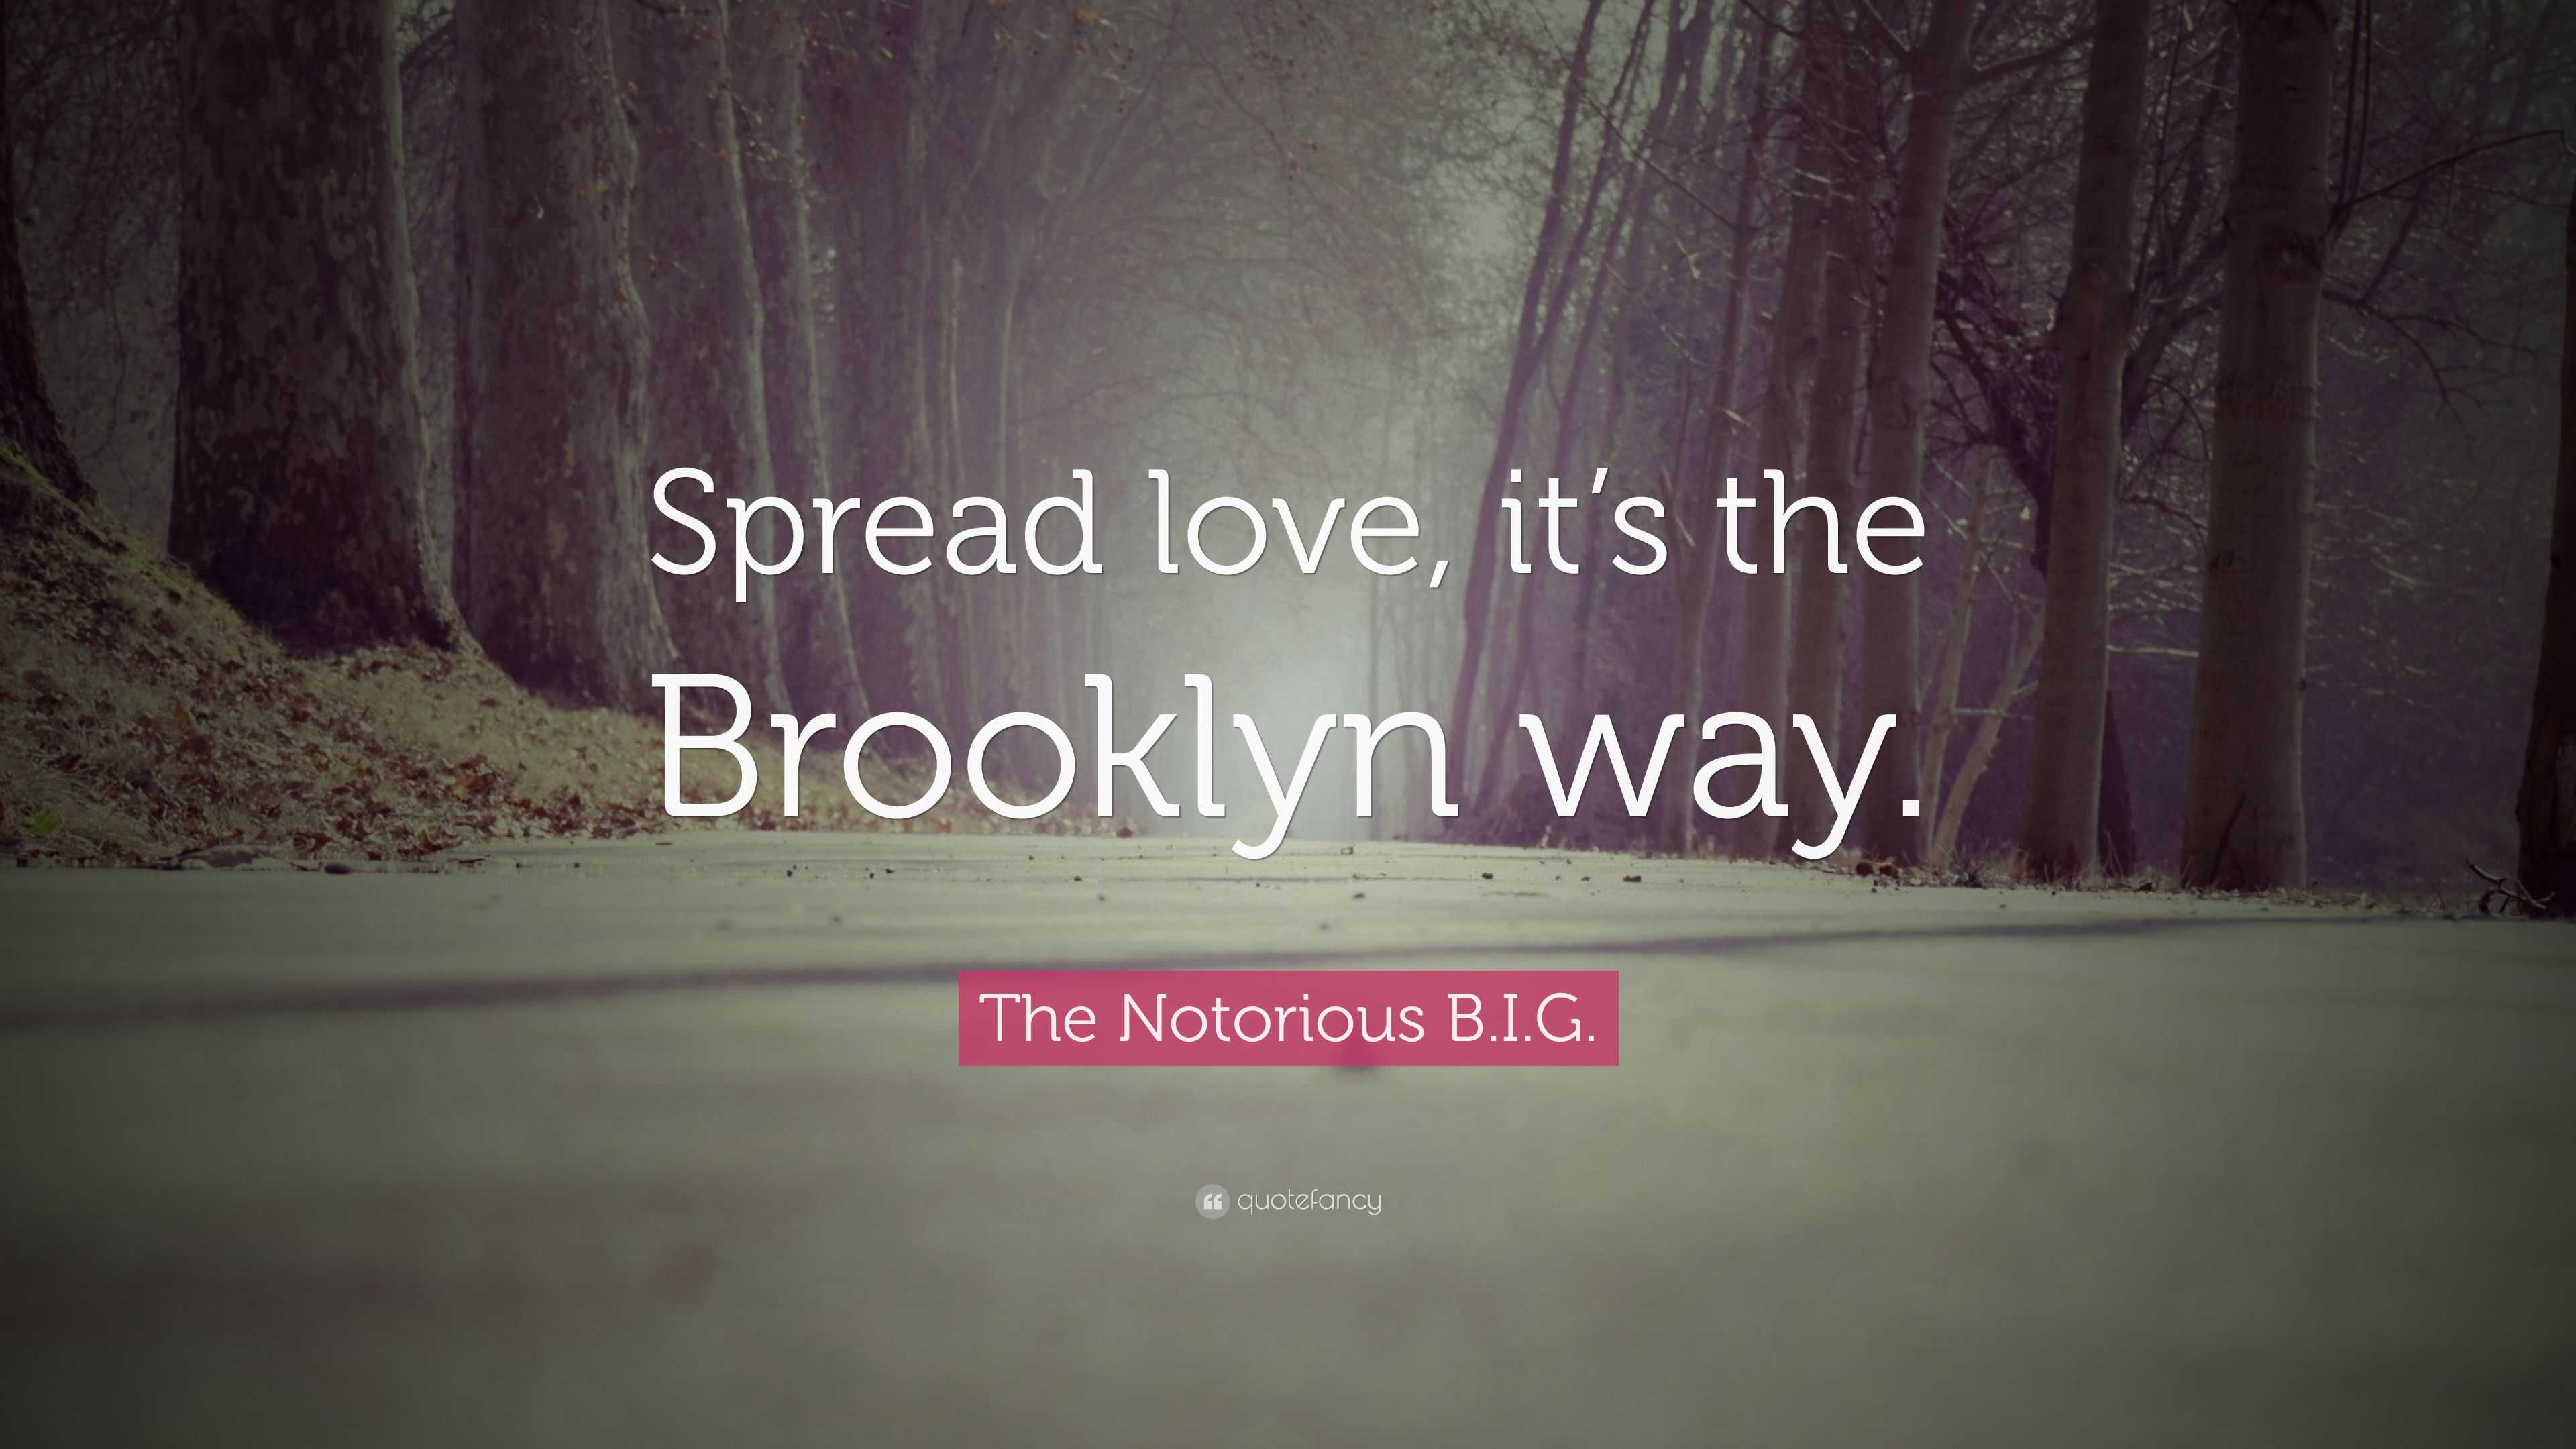 The NBA Spreads Love The Brooklyn Way With Notorious B.I.G.